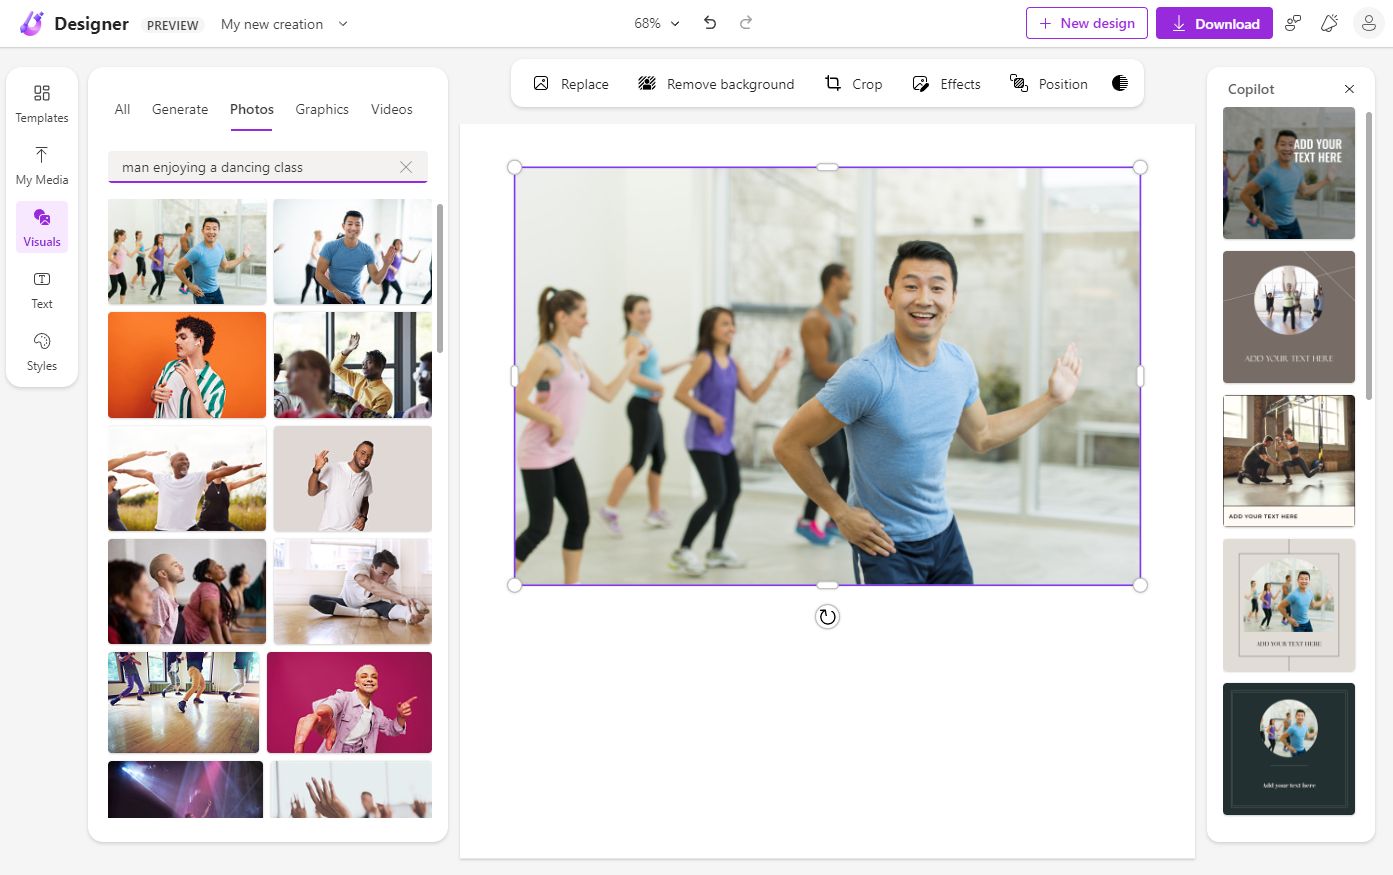 microsoft designer can find simu liu's photos on gettyimages